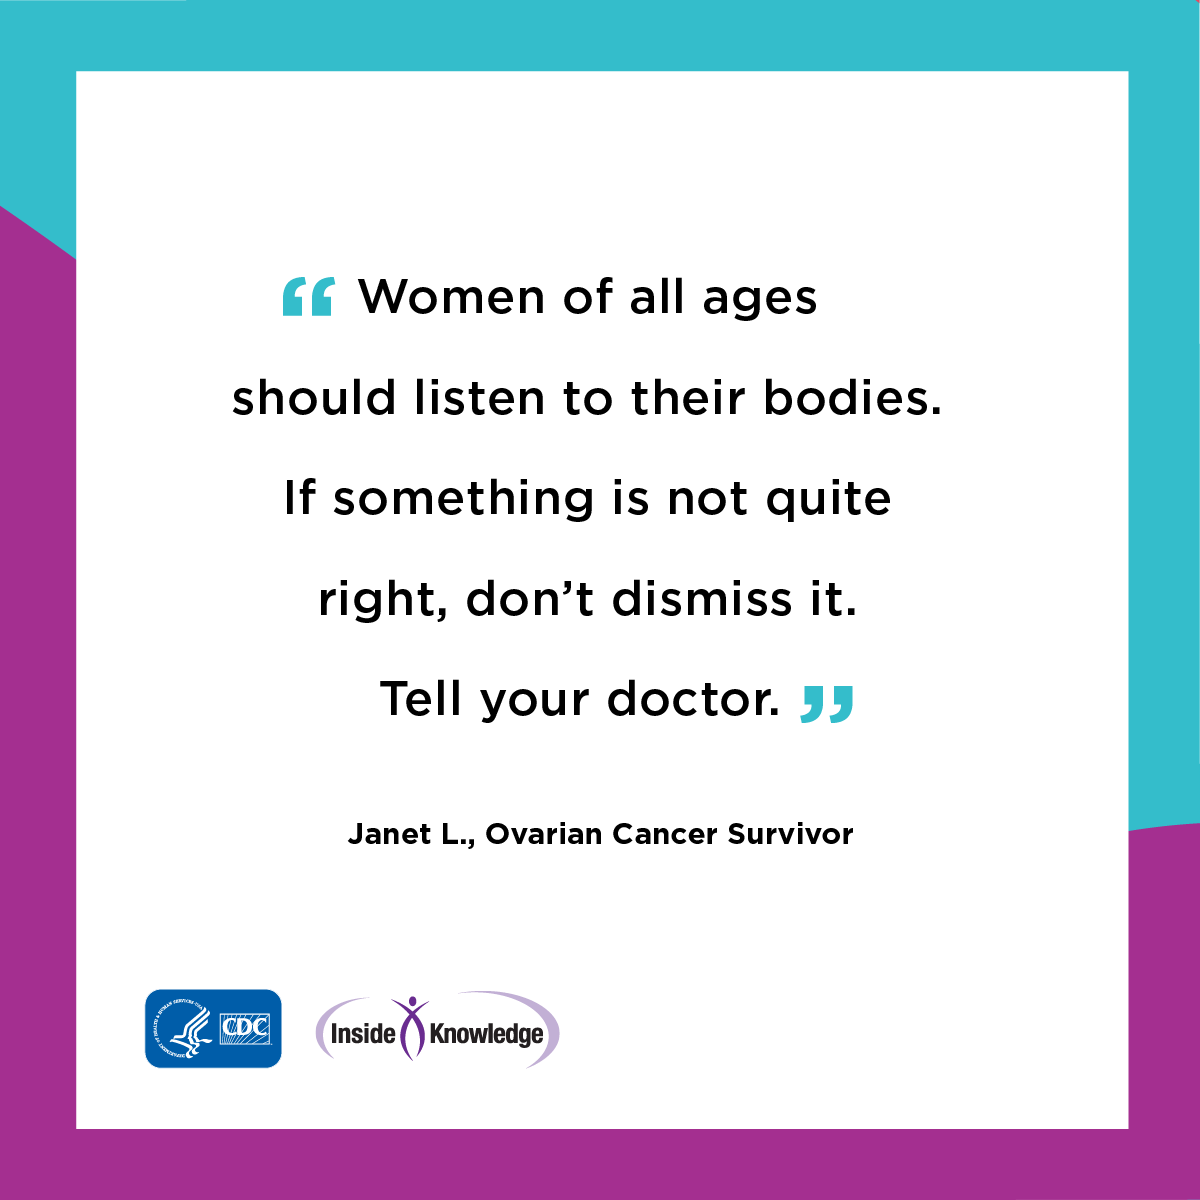 Women of all ages is to listen to your body. If something is not quite right, don’t dismiss it. Tell your doctor. Janet L., Ovarian Cancer Survivor